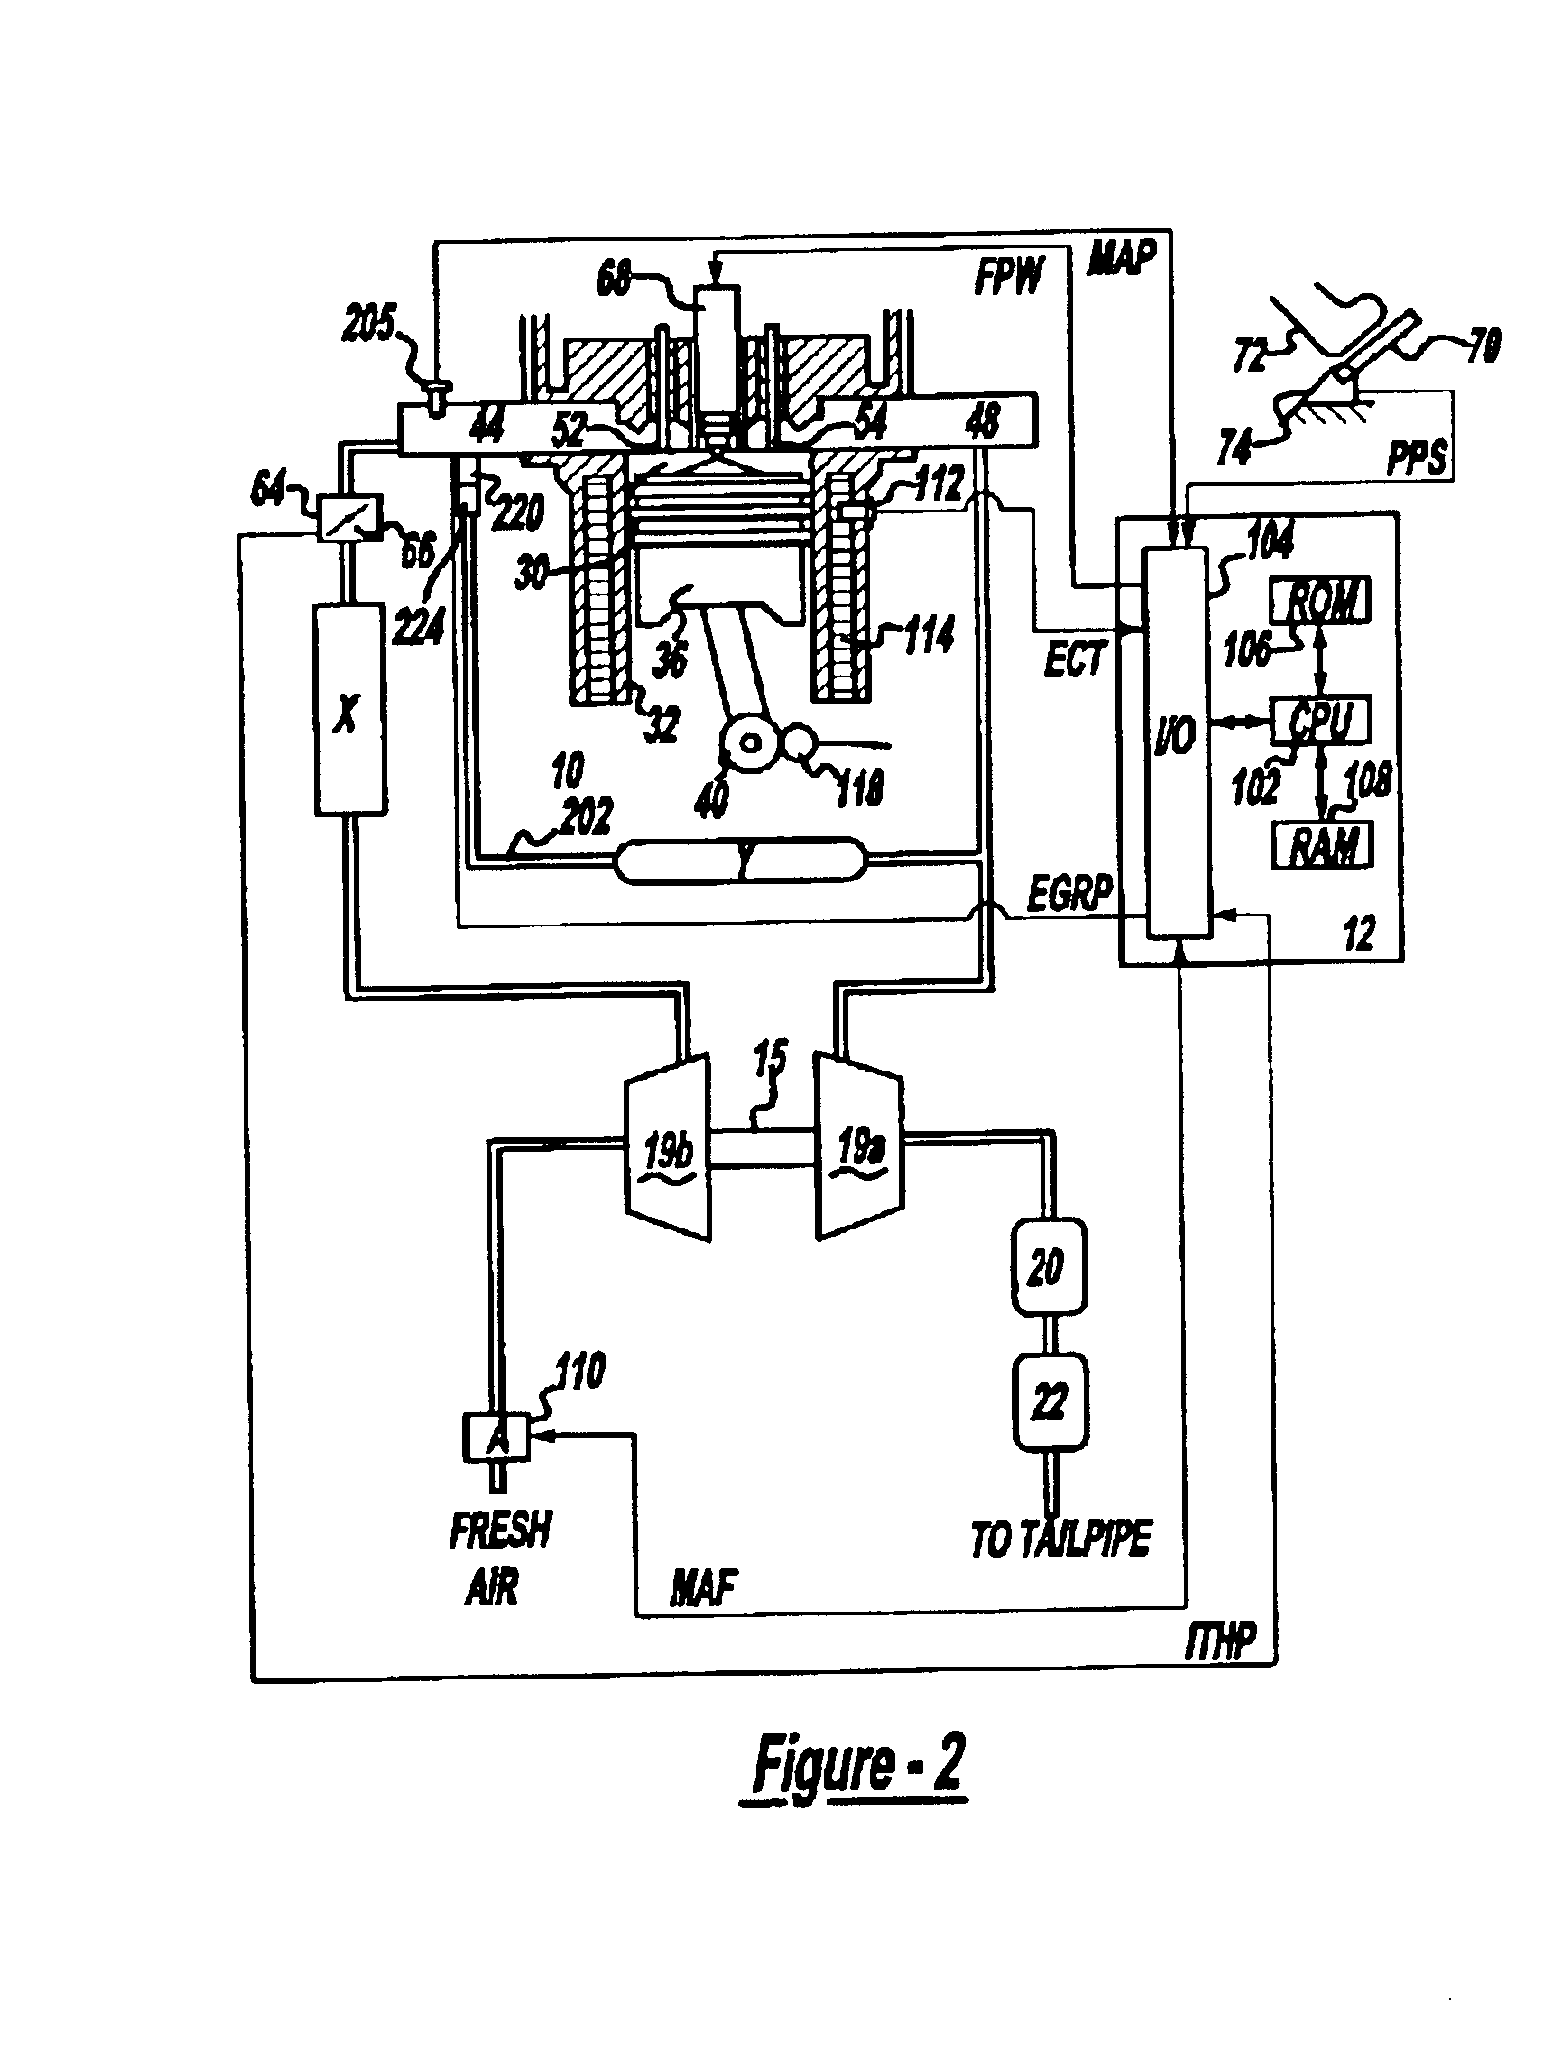 System and method for reducing NOx emissions during transient conditions in a diesel fueled vehicle